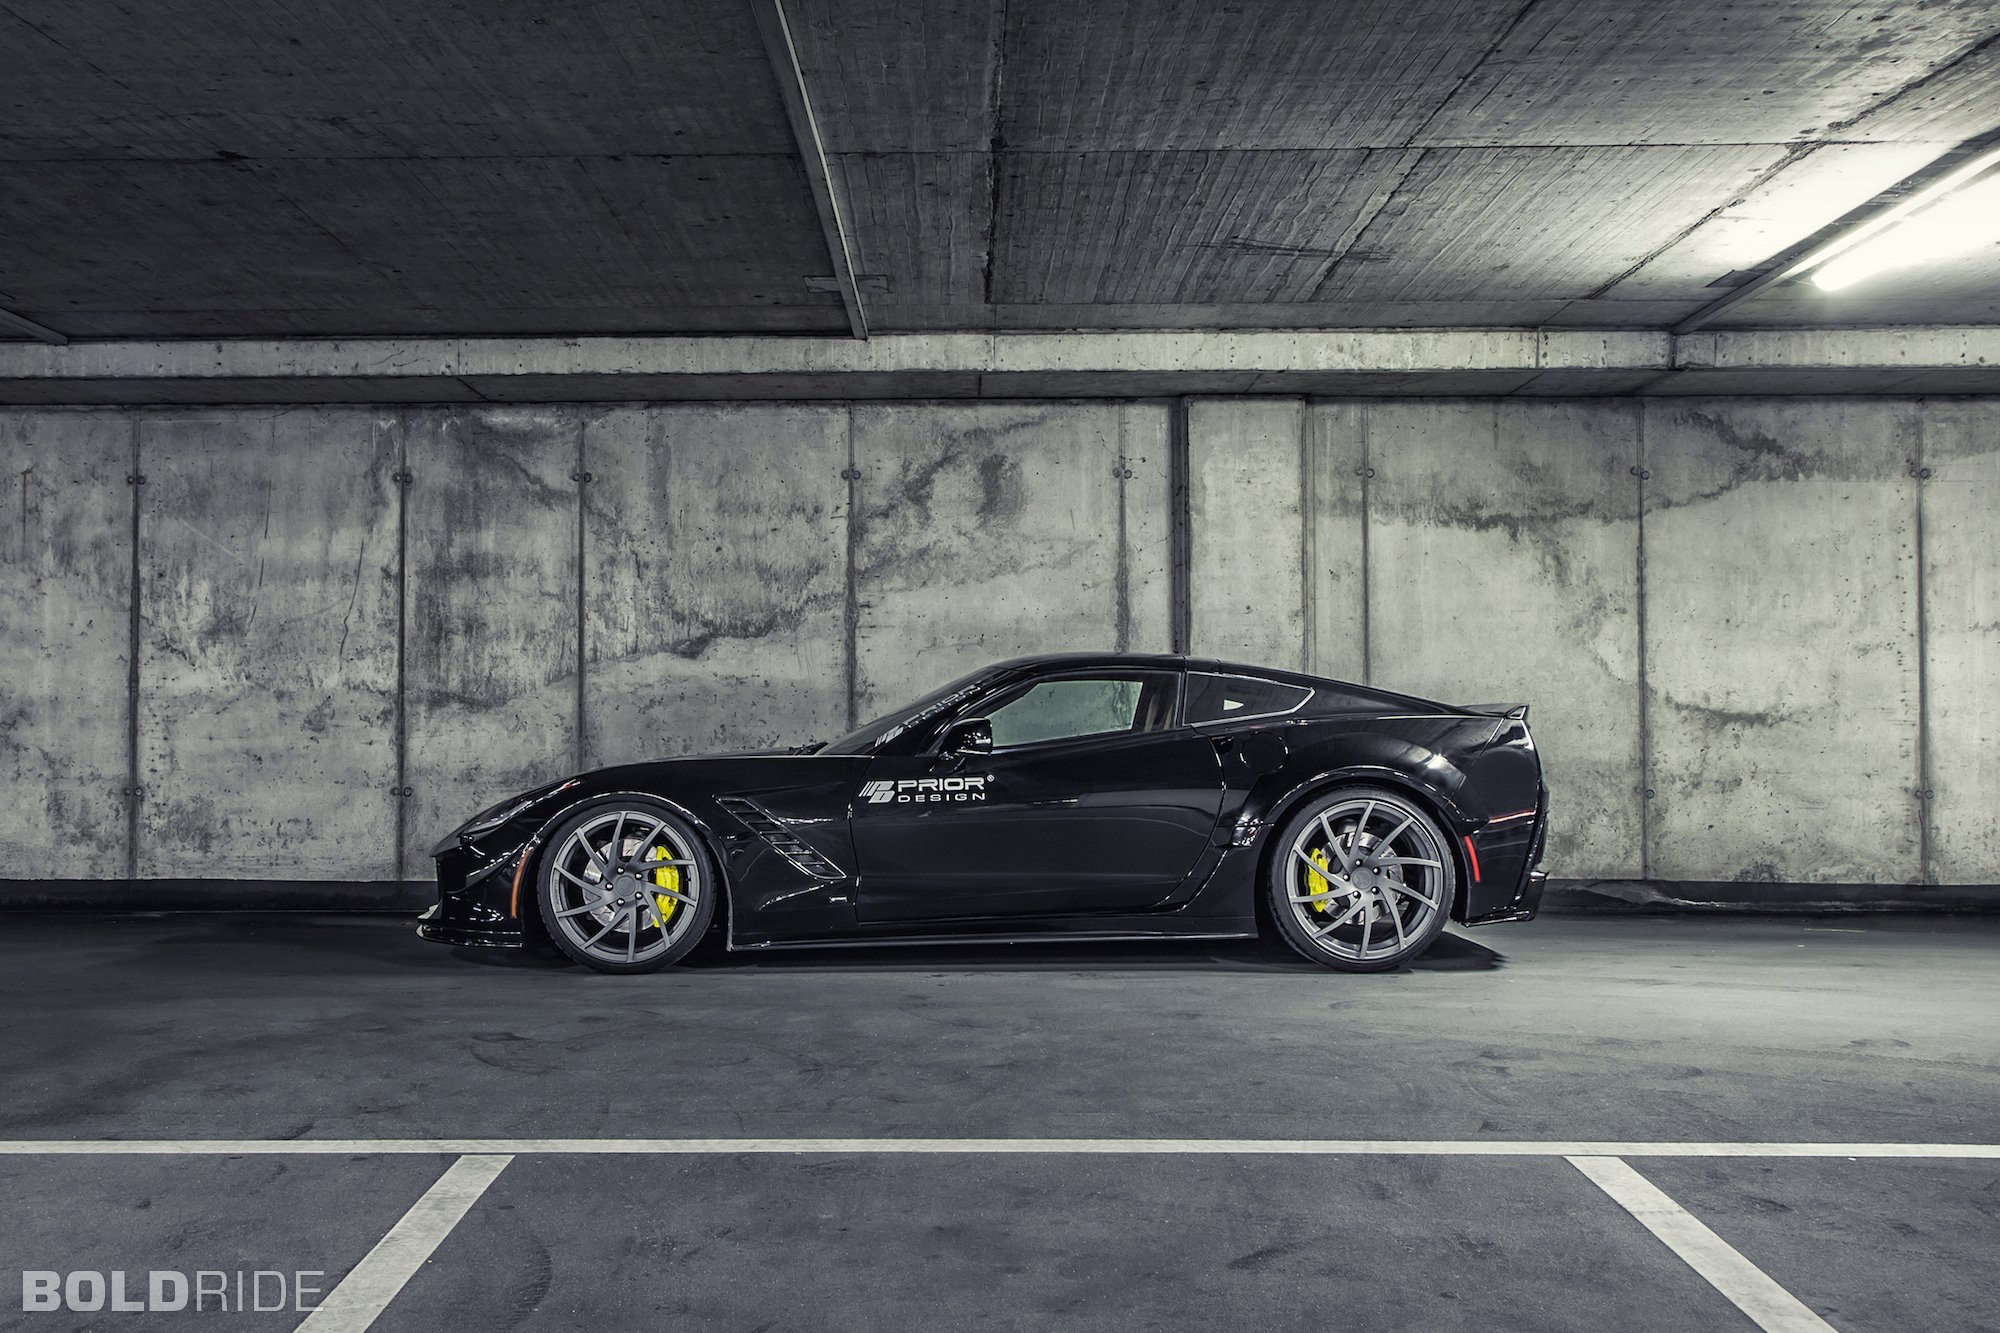 2015, Prior design, Chevrolet, Corvette, Stingray, Pdr700, Muscle, Tuning, Supercar, Sting, Ray Wallpaper